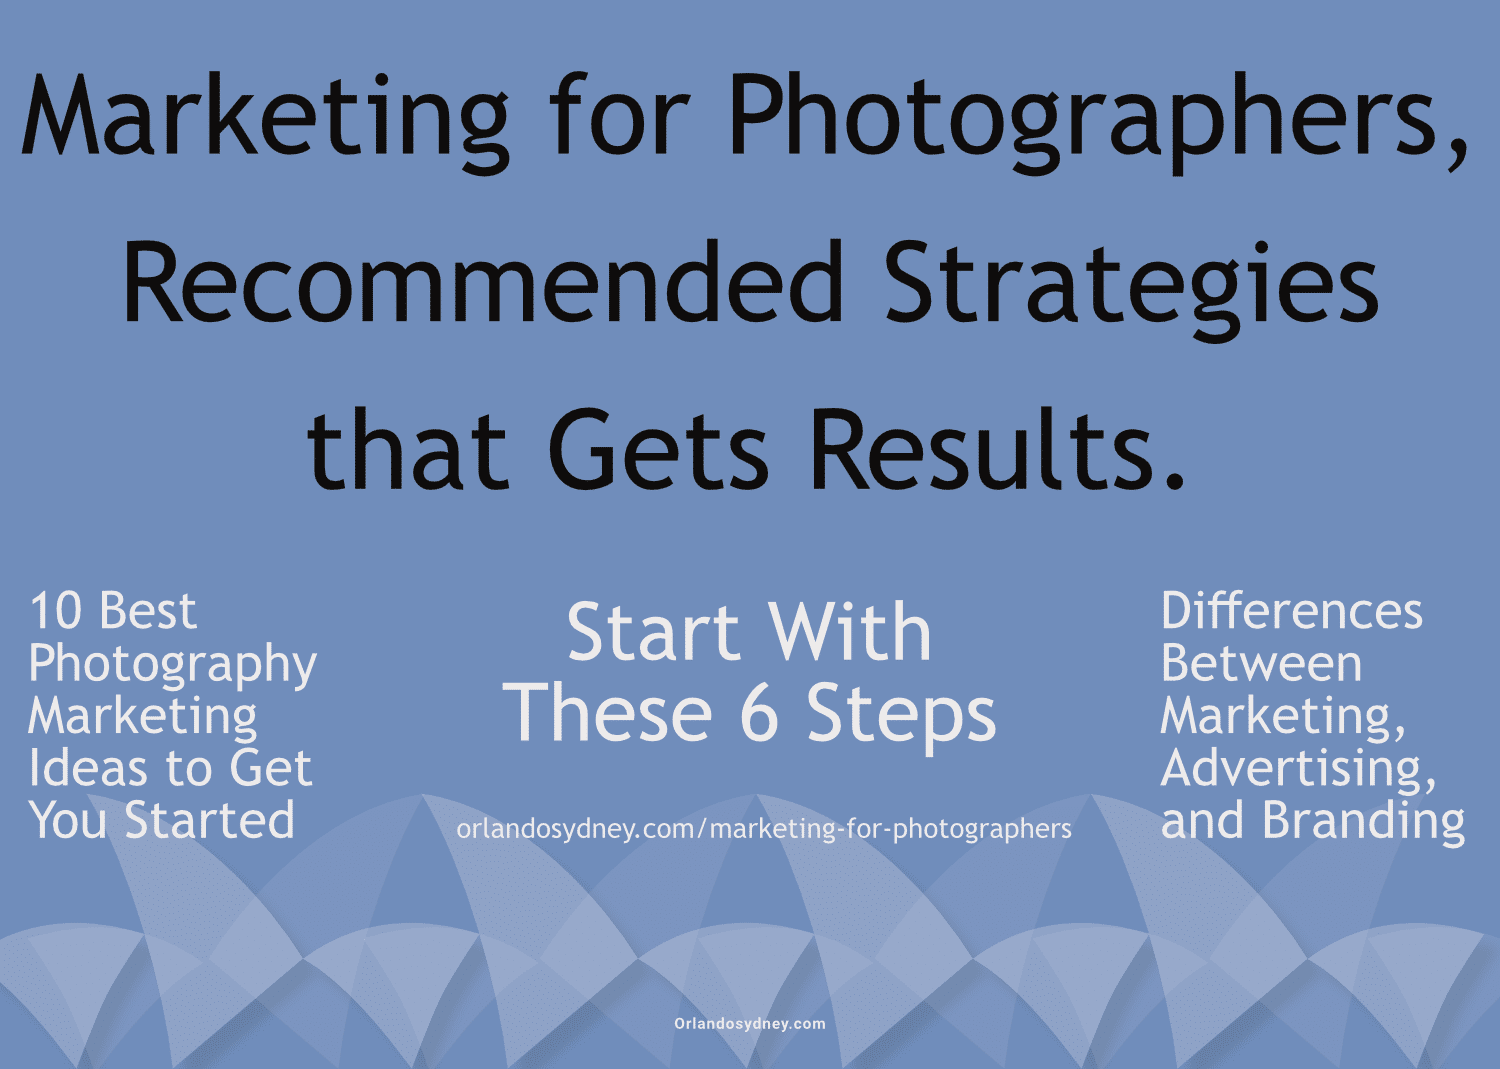 Graphic: Marketing for Photographers, Recommended Strategies that Gets Great Results